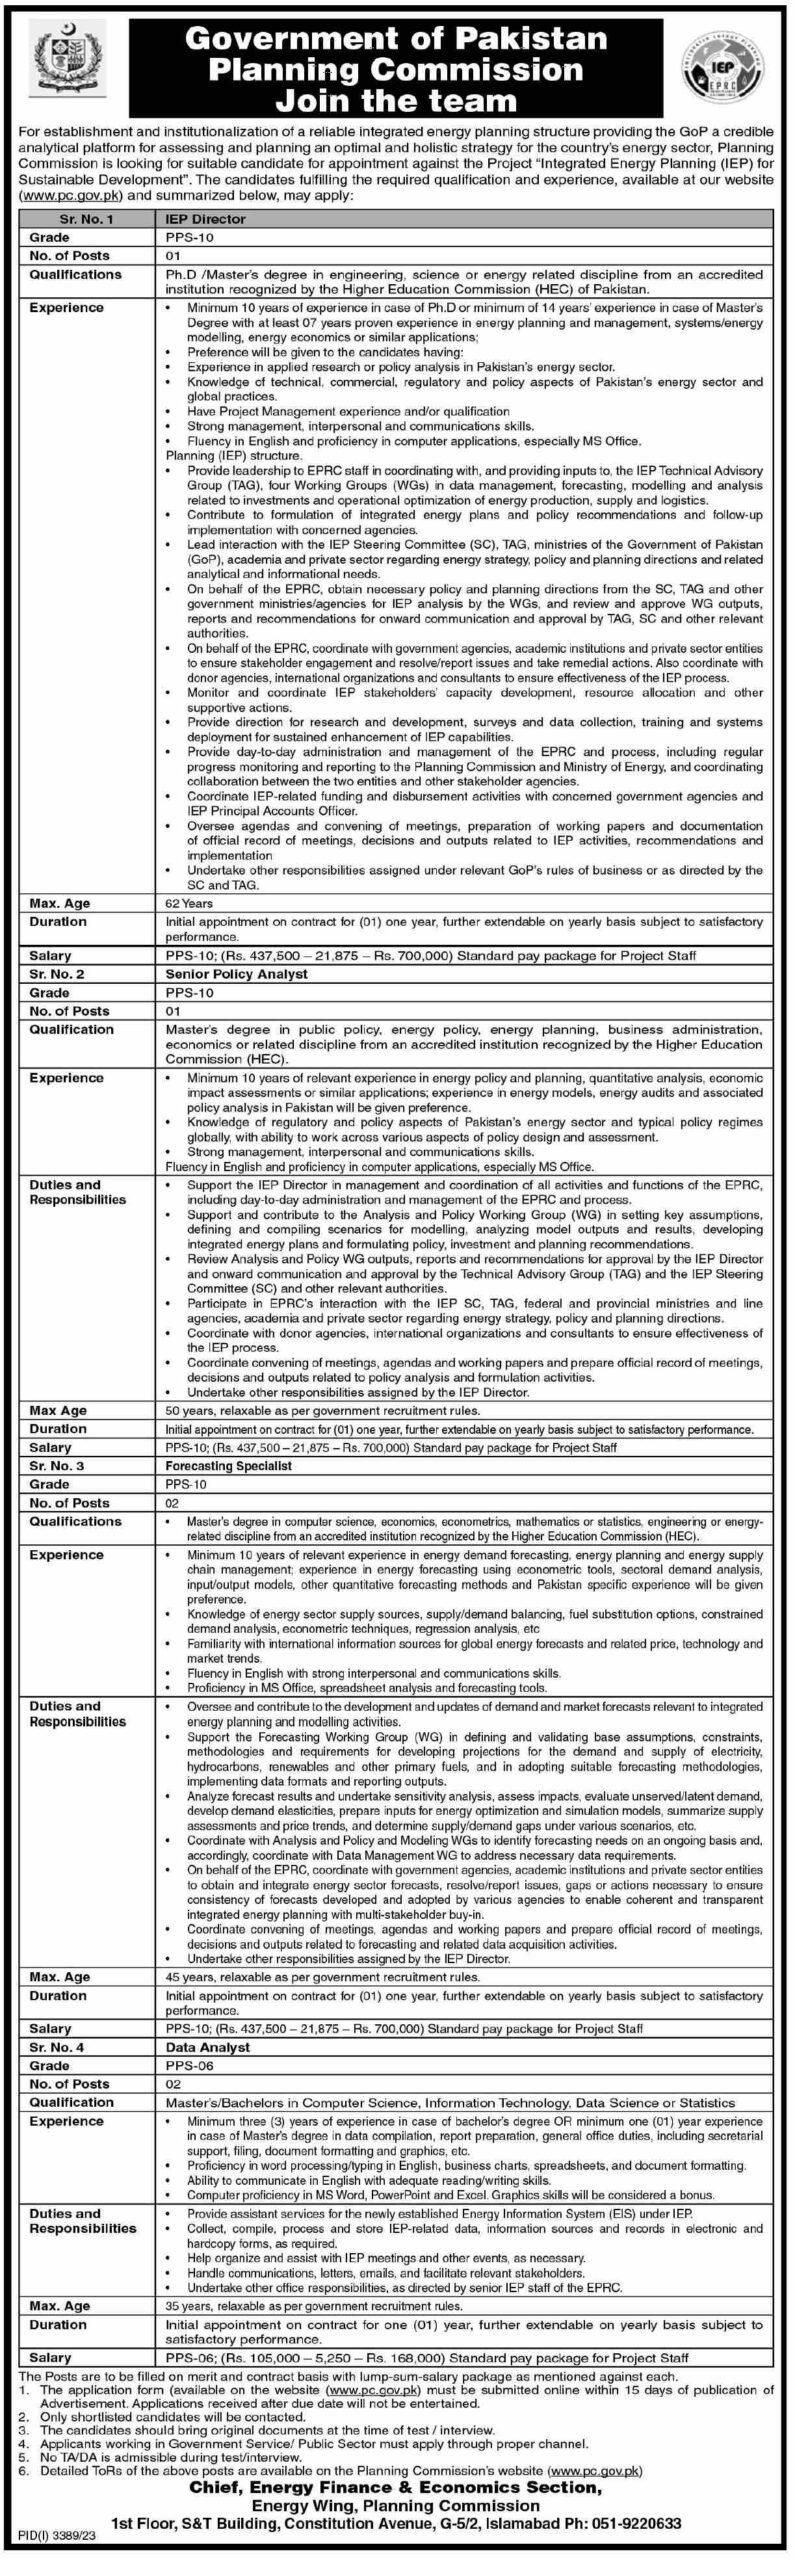 Government of Pakistan Planning Commission Jobs Bachelors Masters PhD Degree Holders